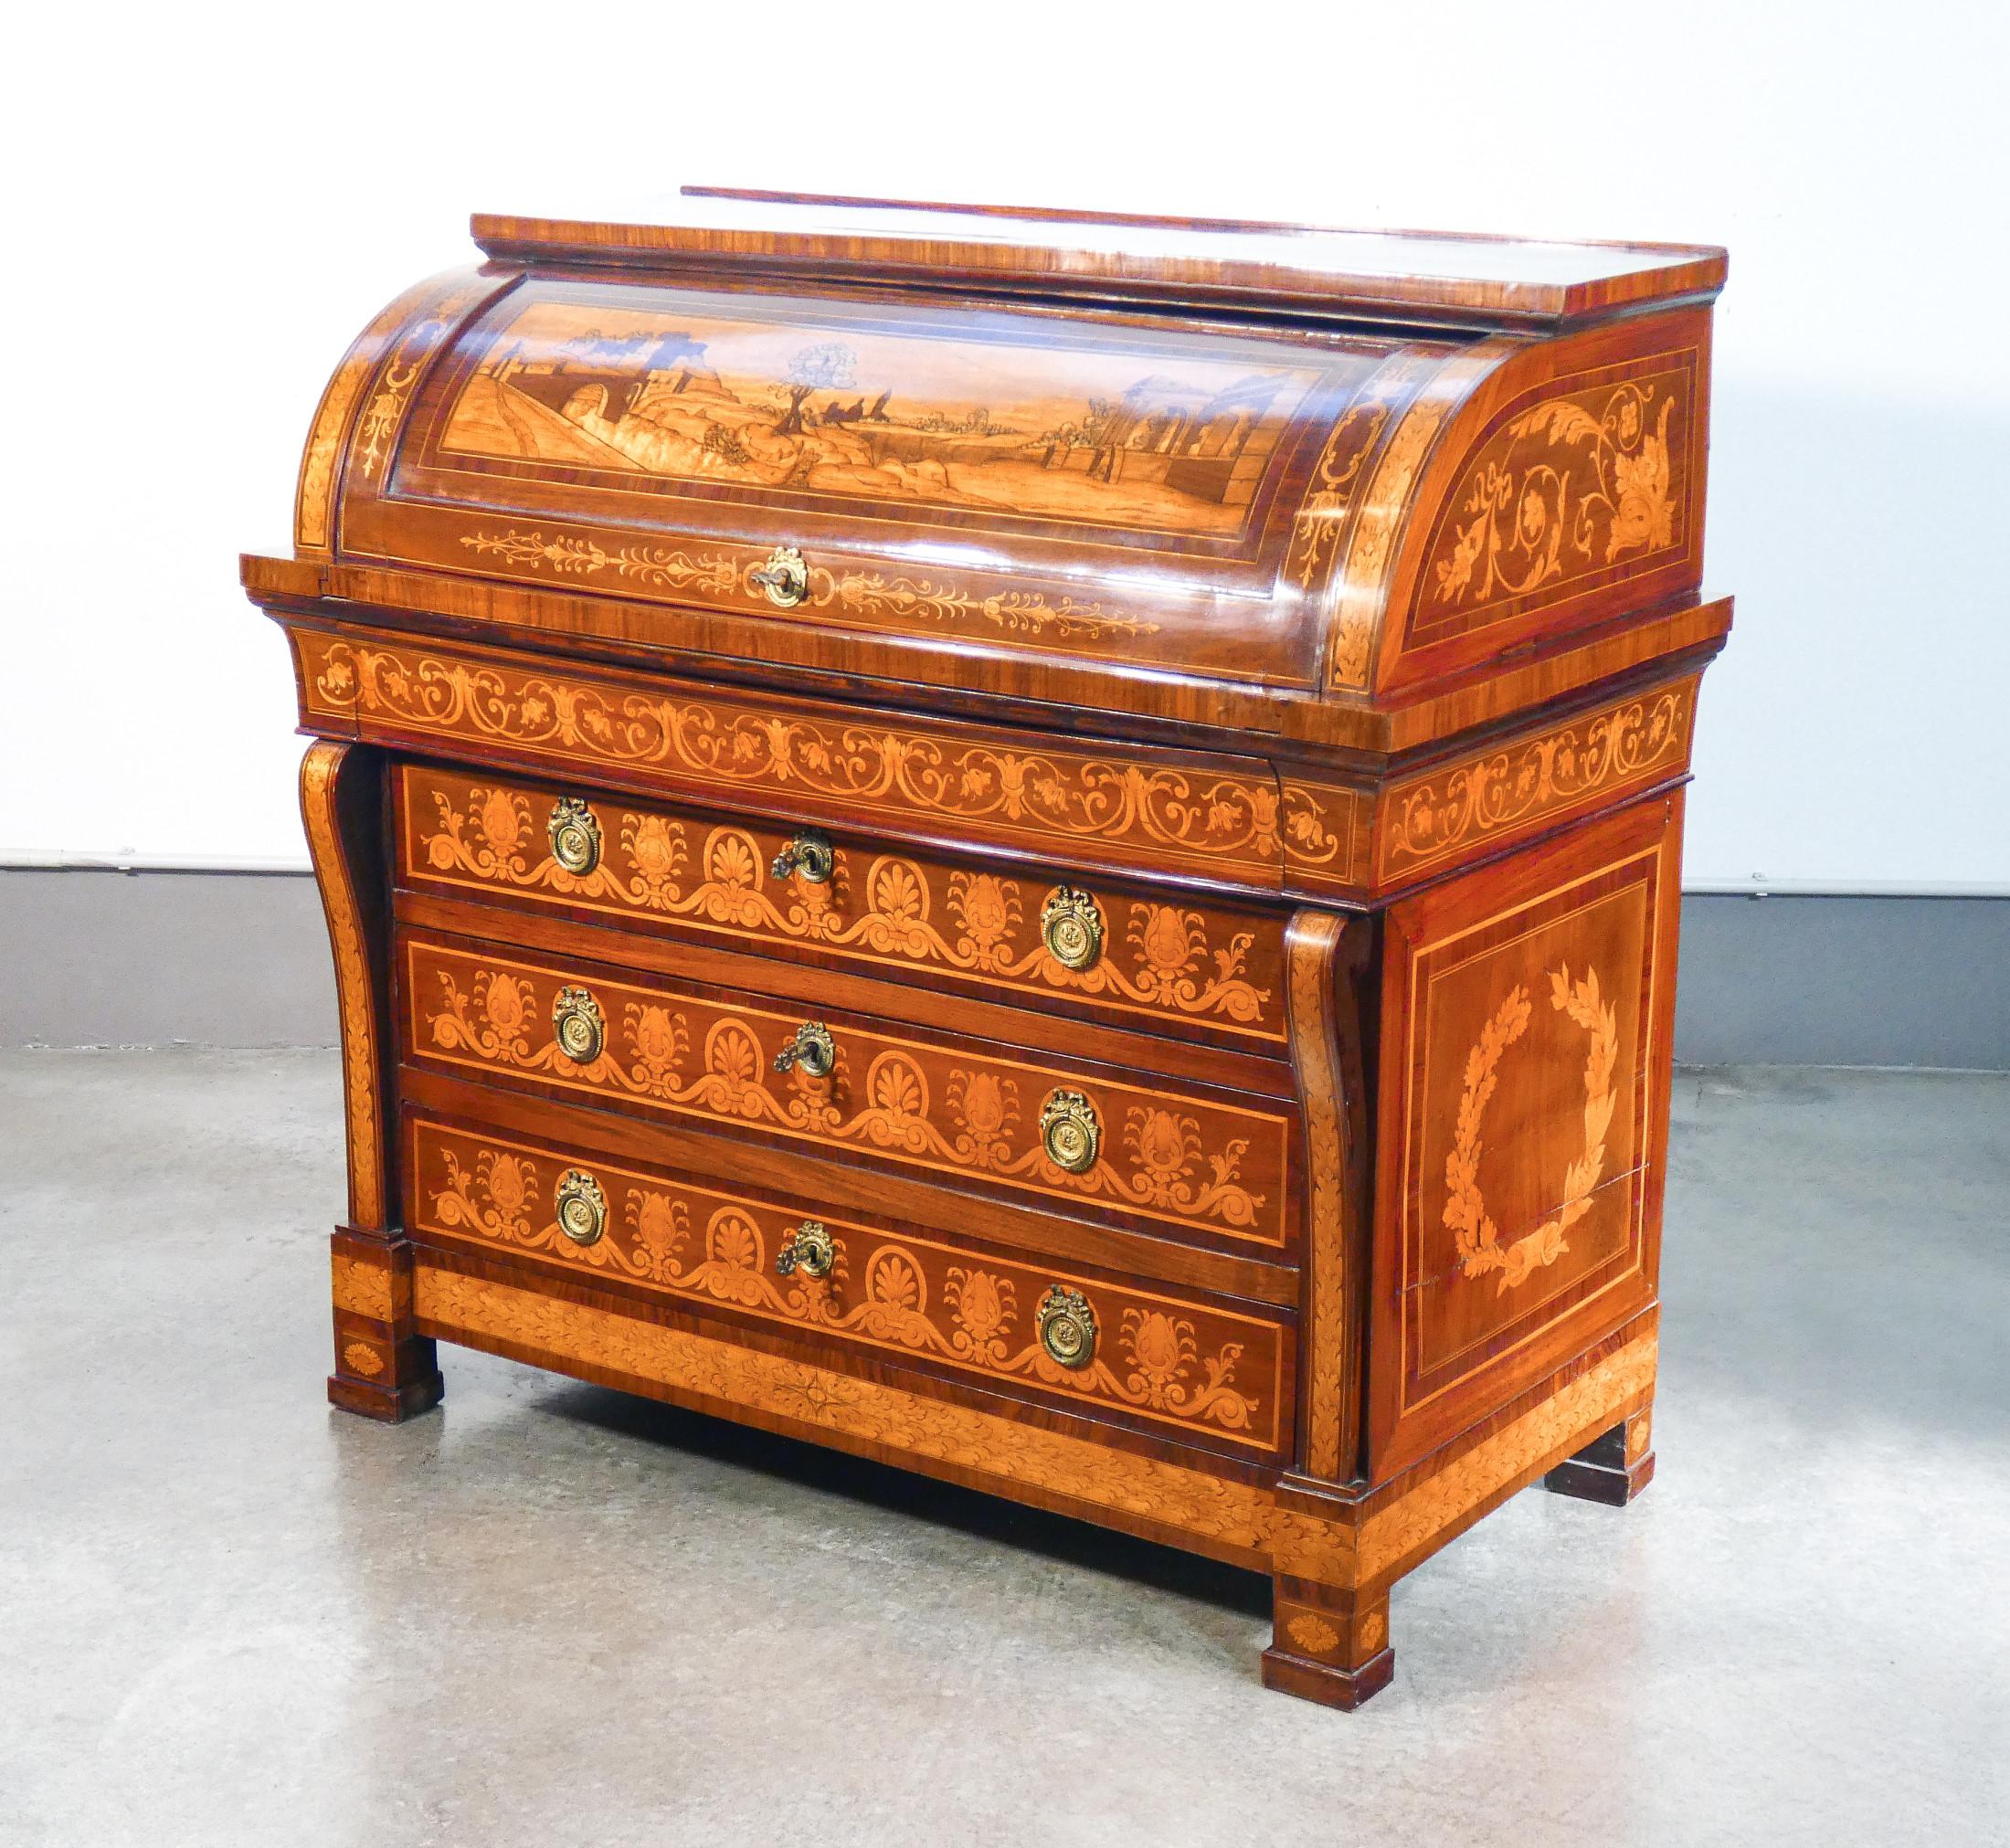 Italian Empire Secretaire with Writing Desk, Richly Inlaid Wood. Italy Late 18th Century For Sale